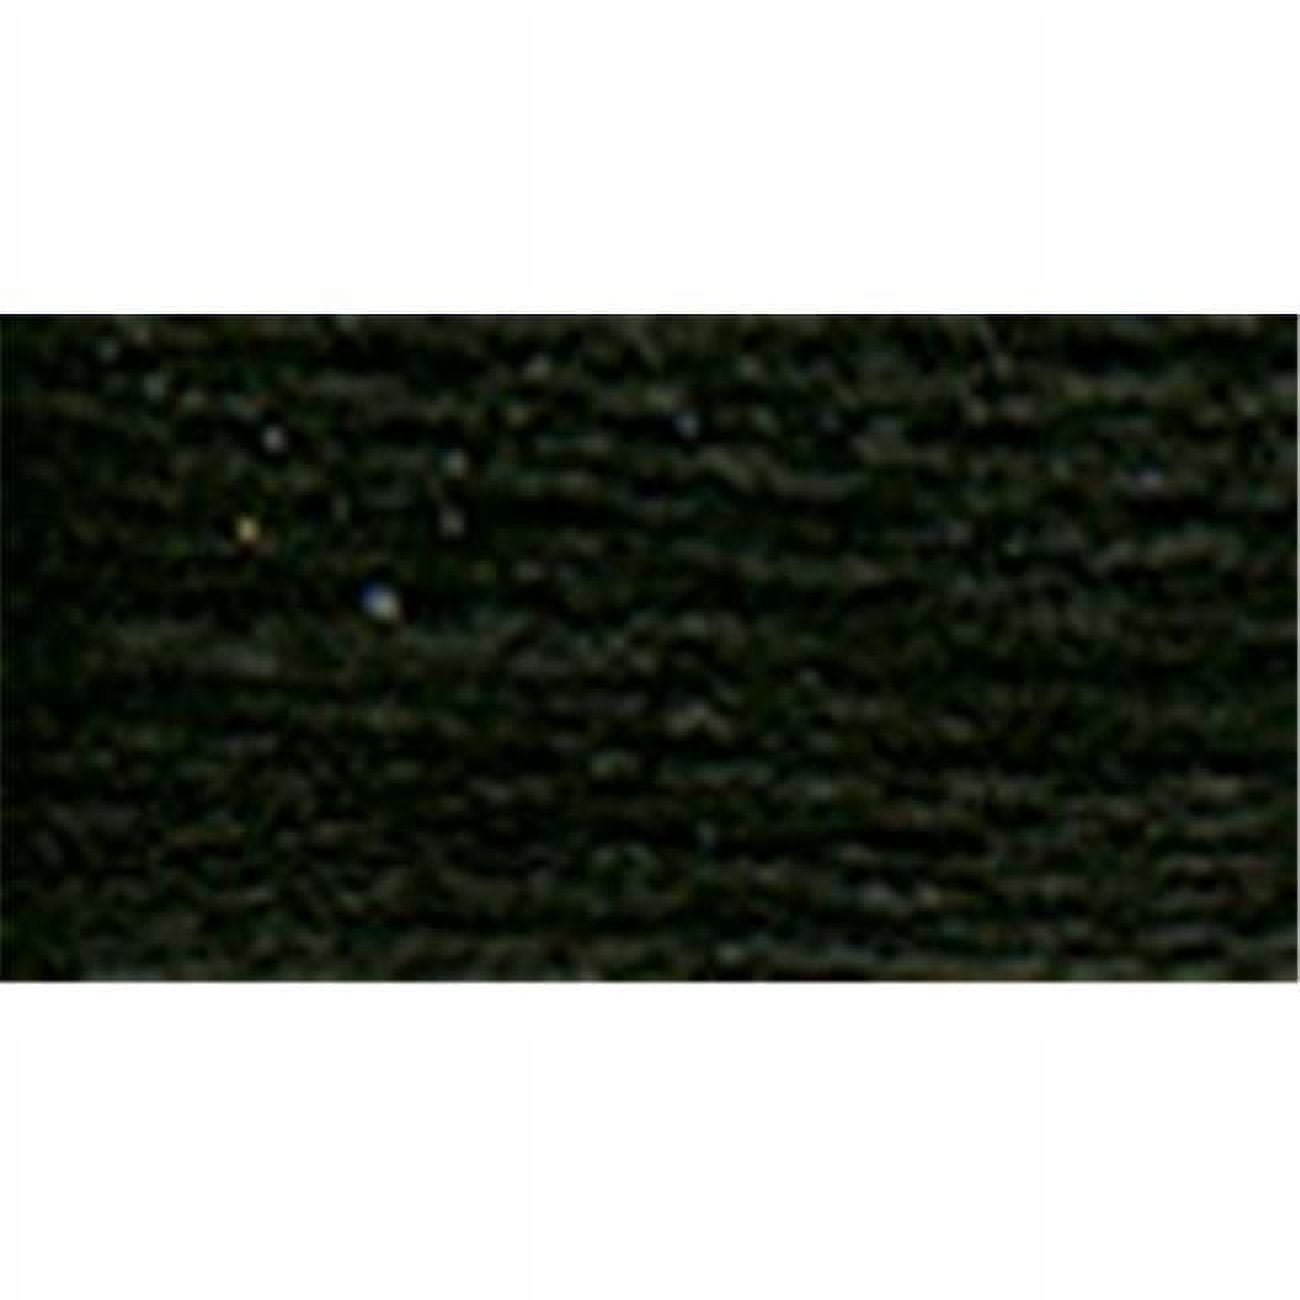 23 Pk. Black 310 Embroidery Floss, New